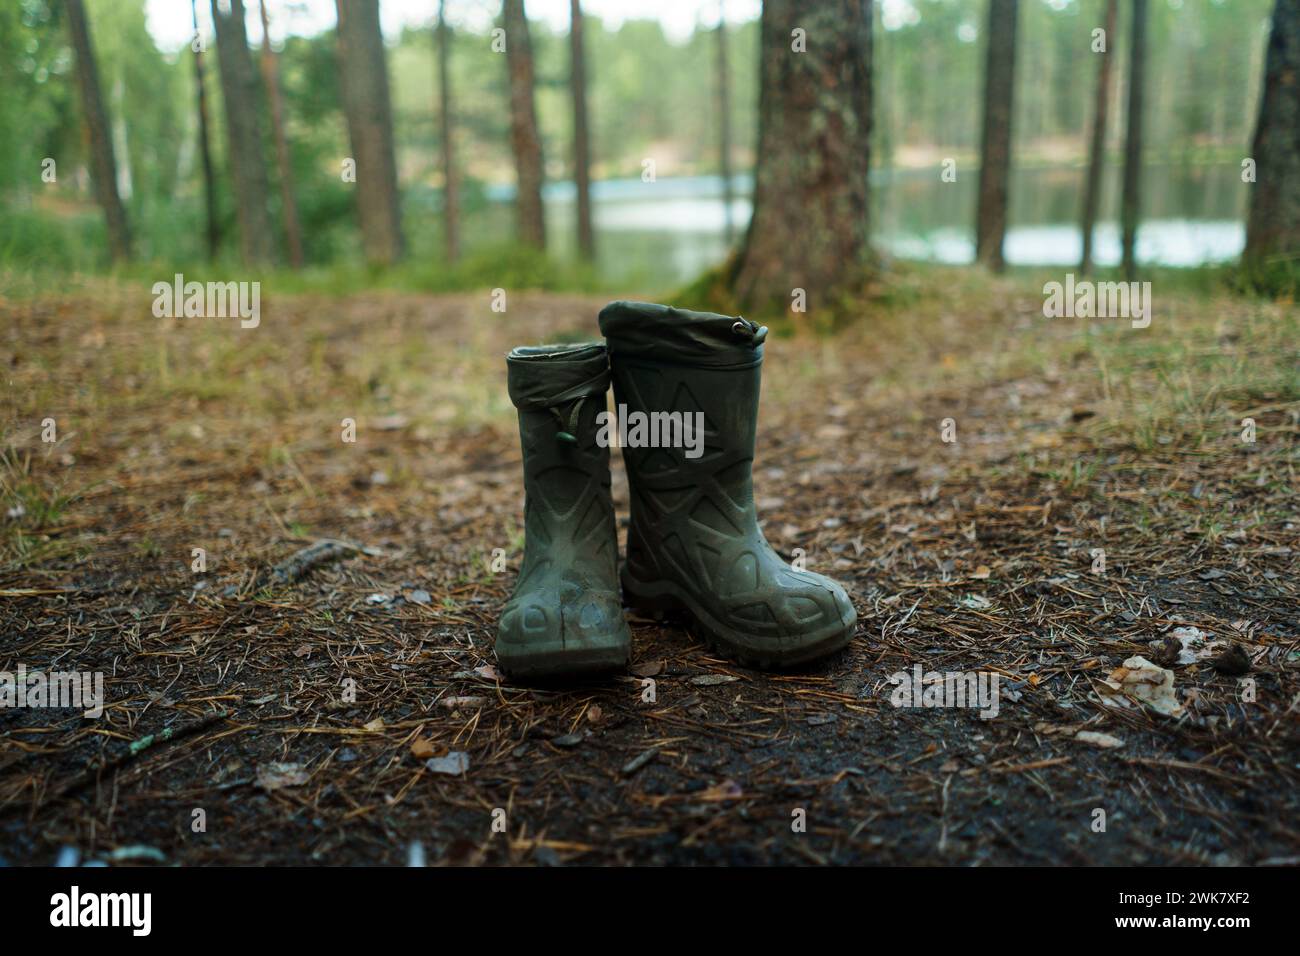 green dirty wellies boots on ground in pine forest Stock Photo